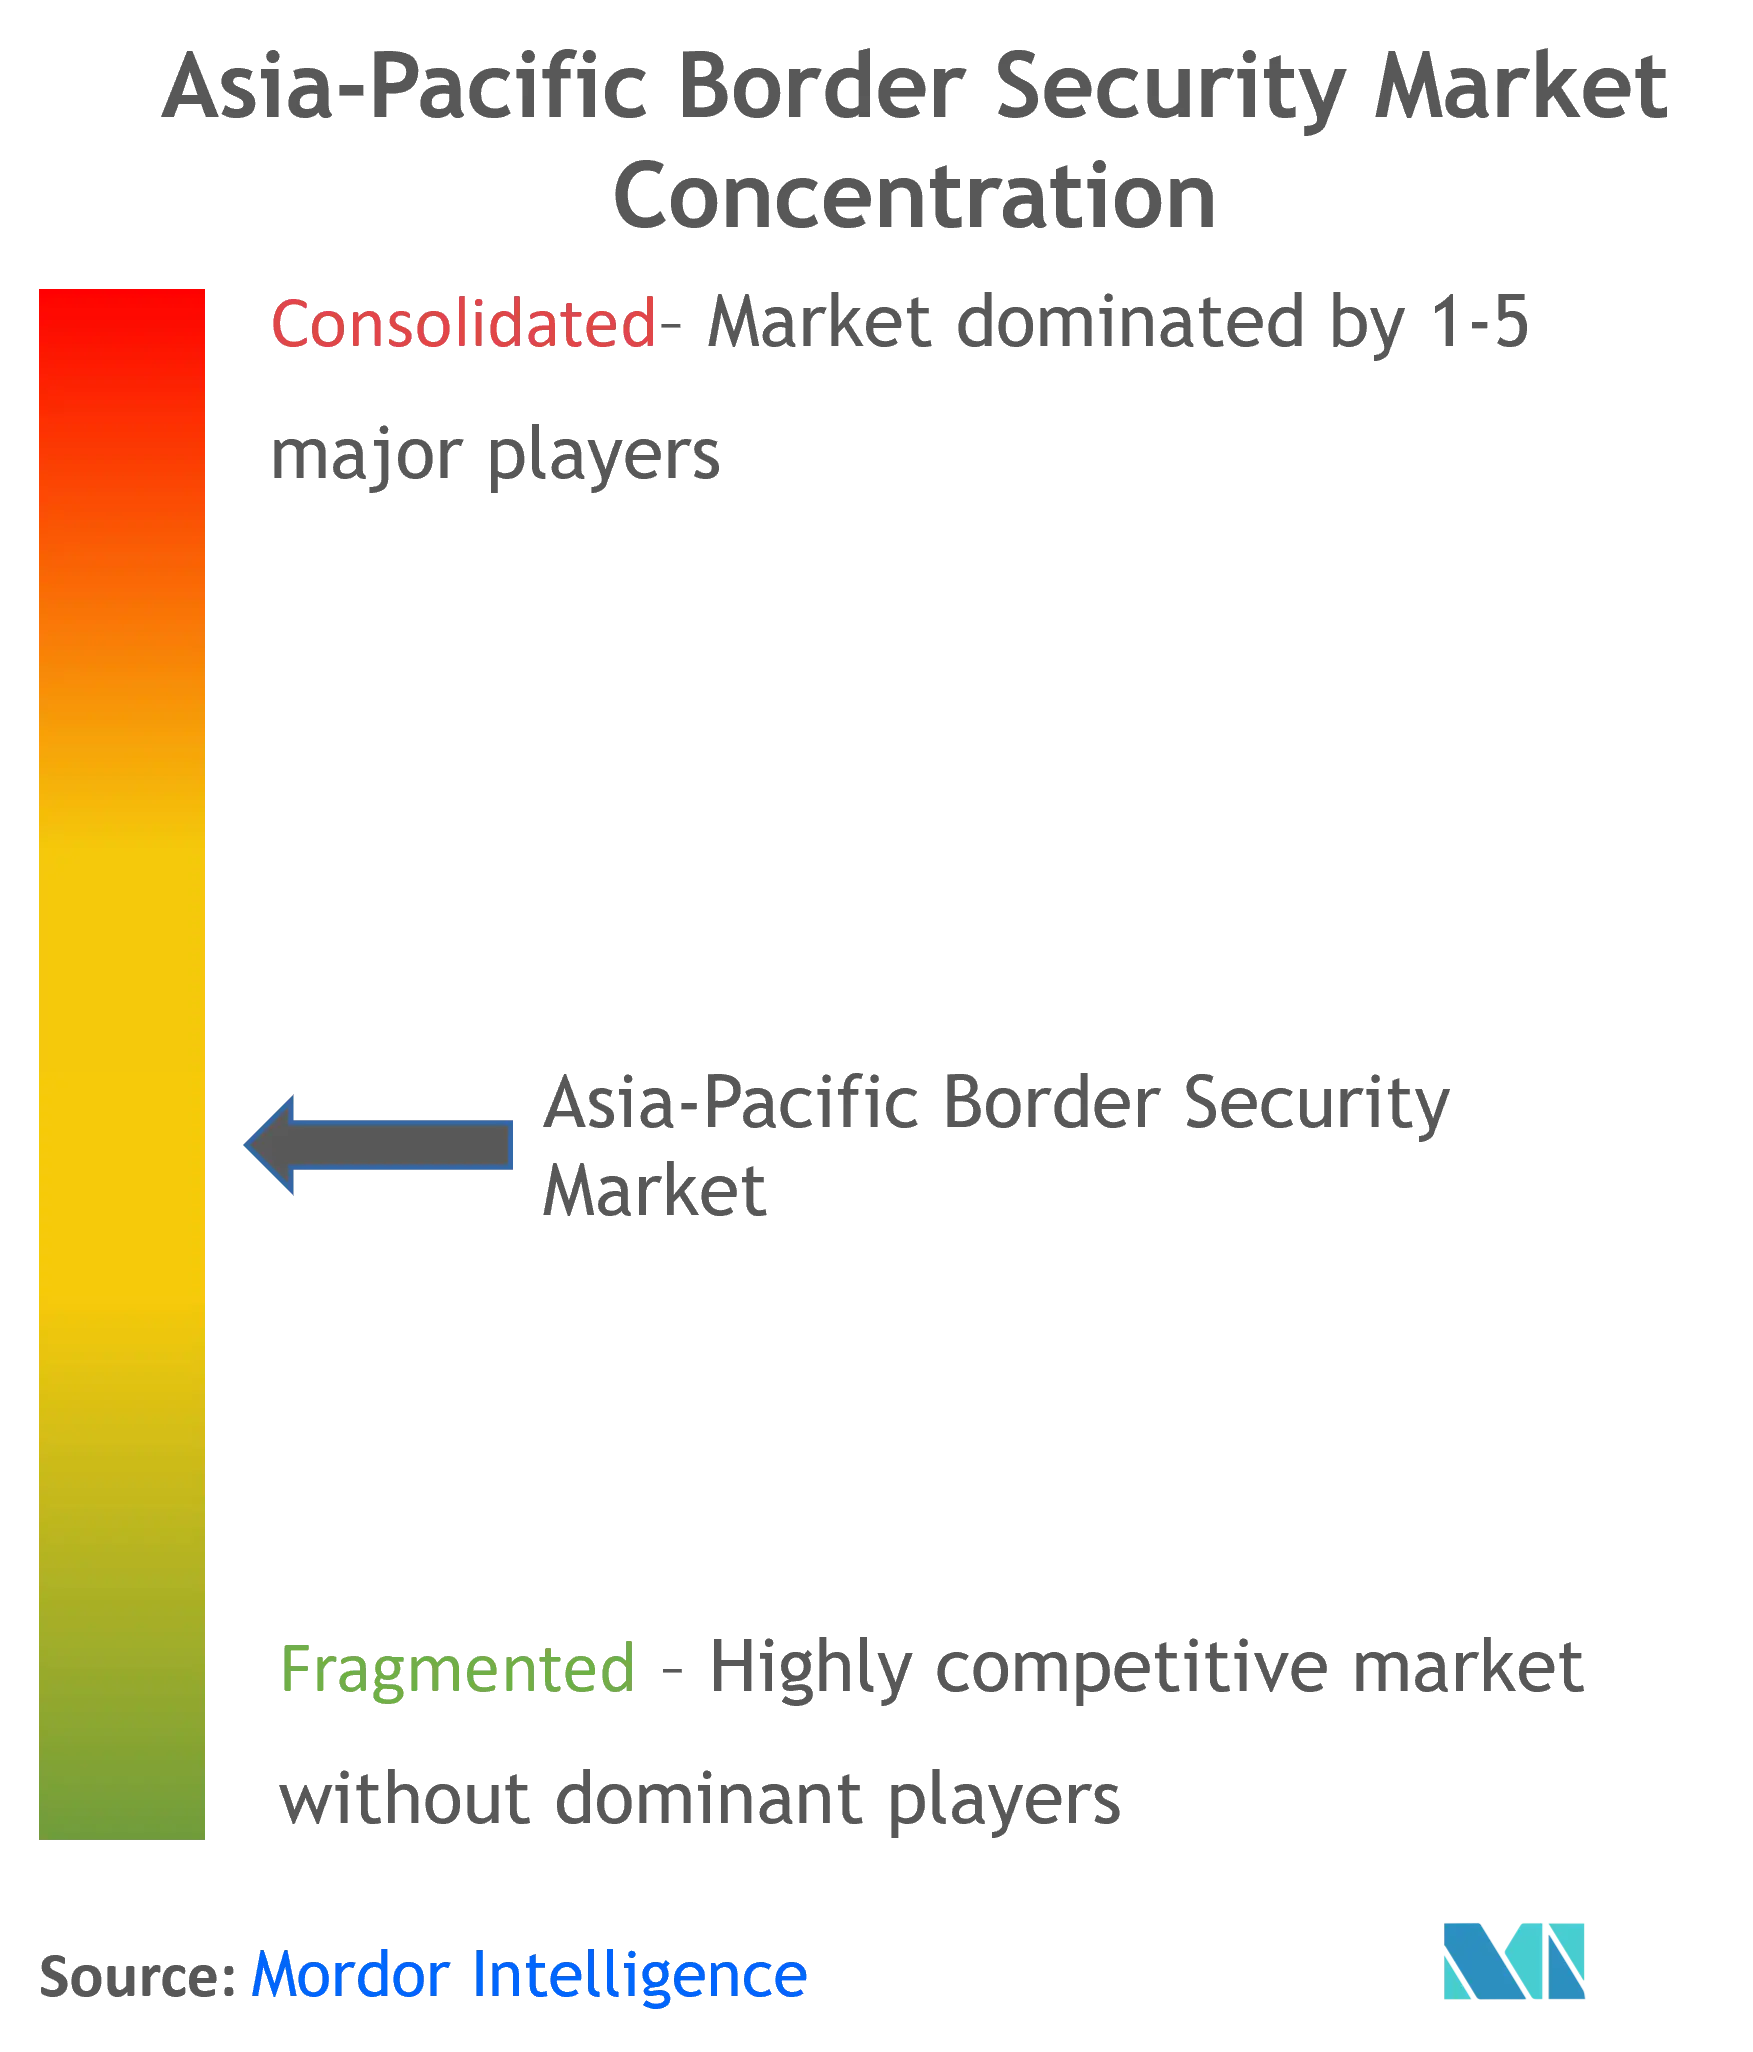 Asia-Pacific Border Security Market Concentration